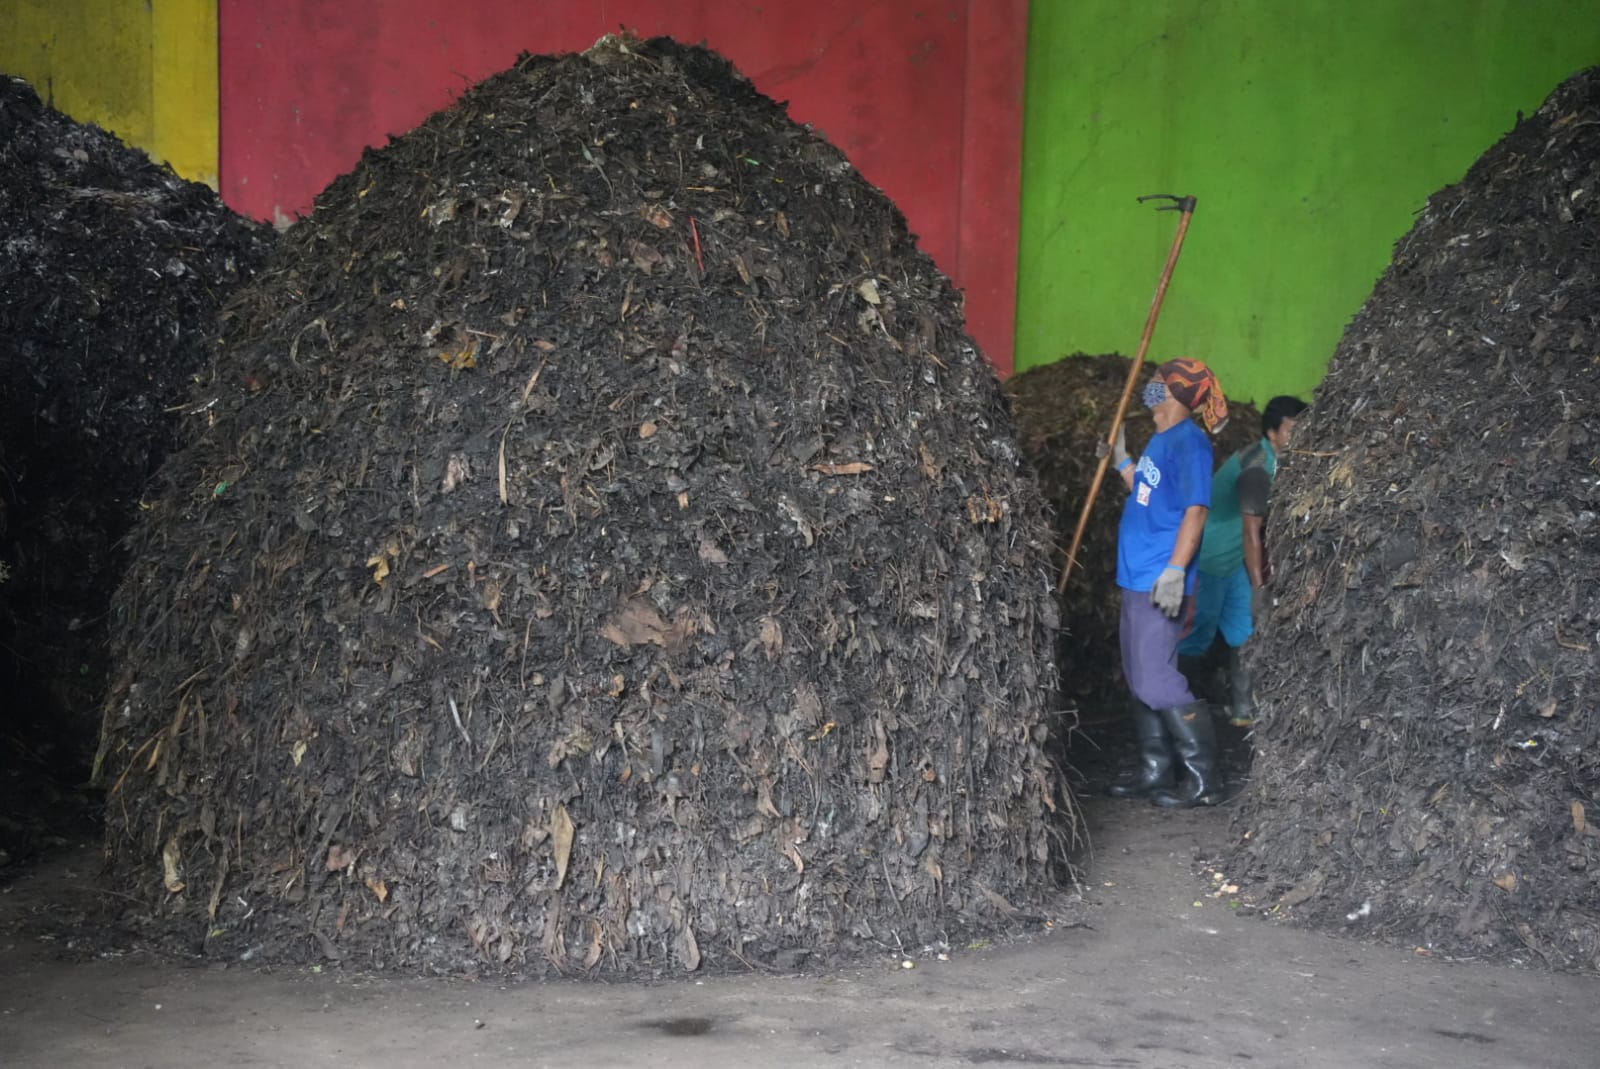 Tour of an organic waste recycling facility in Jakarta